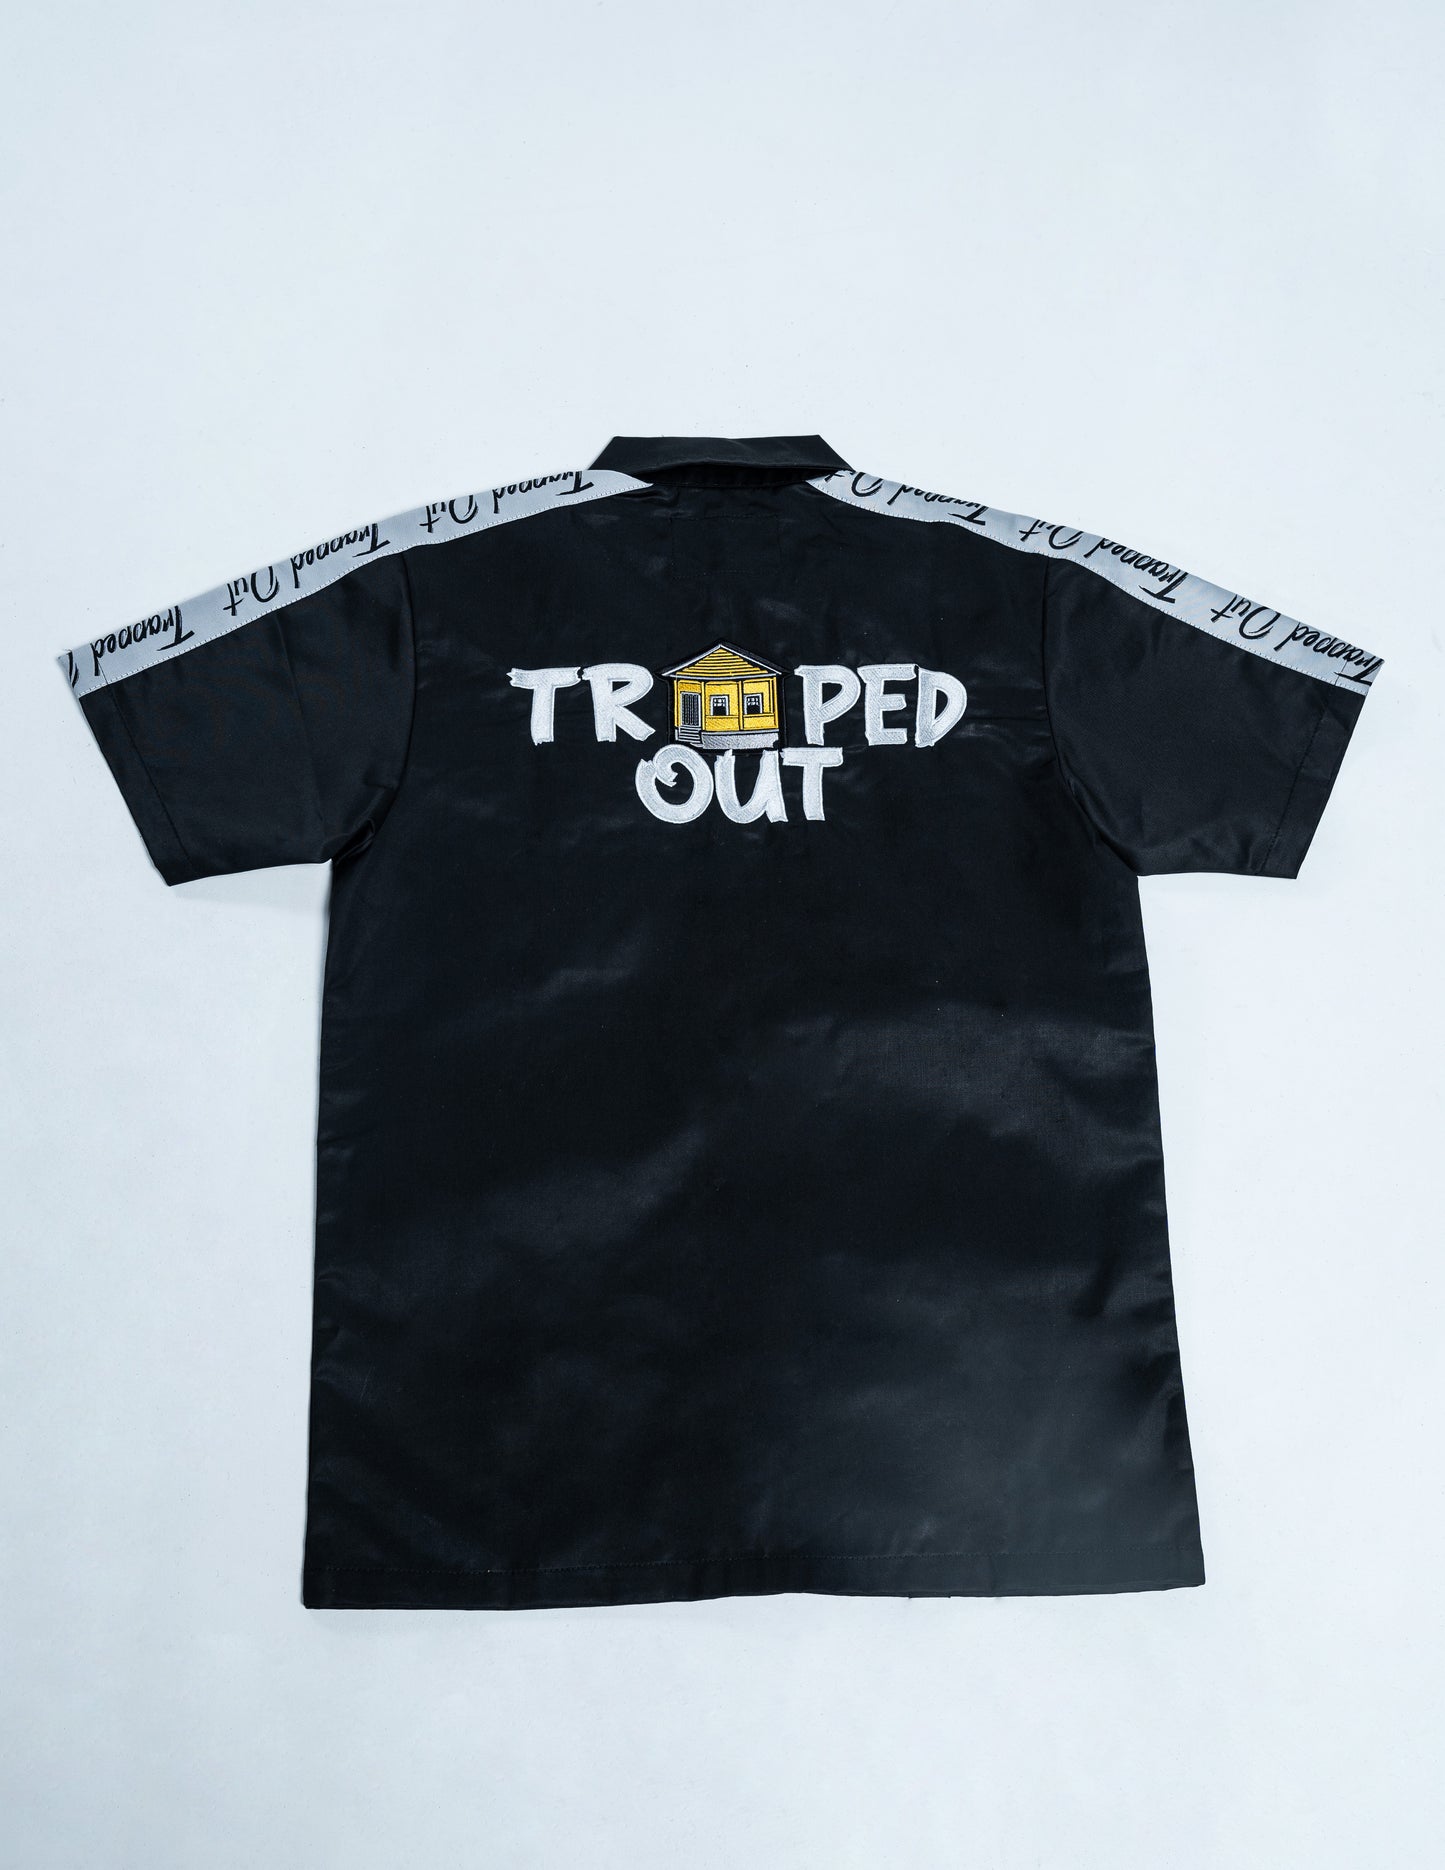 Black Trapped Out Dickie Shirt